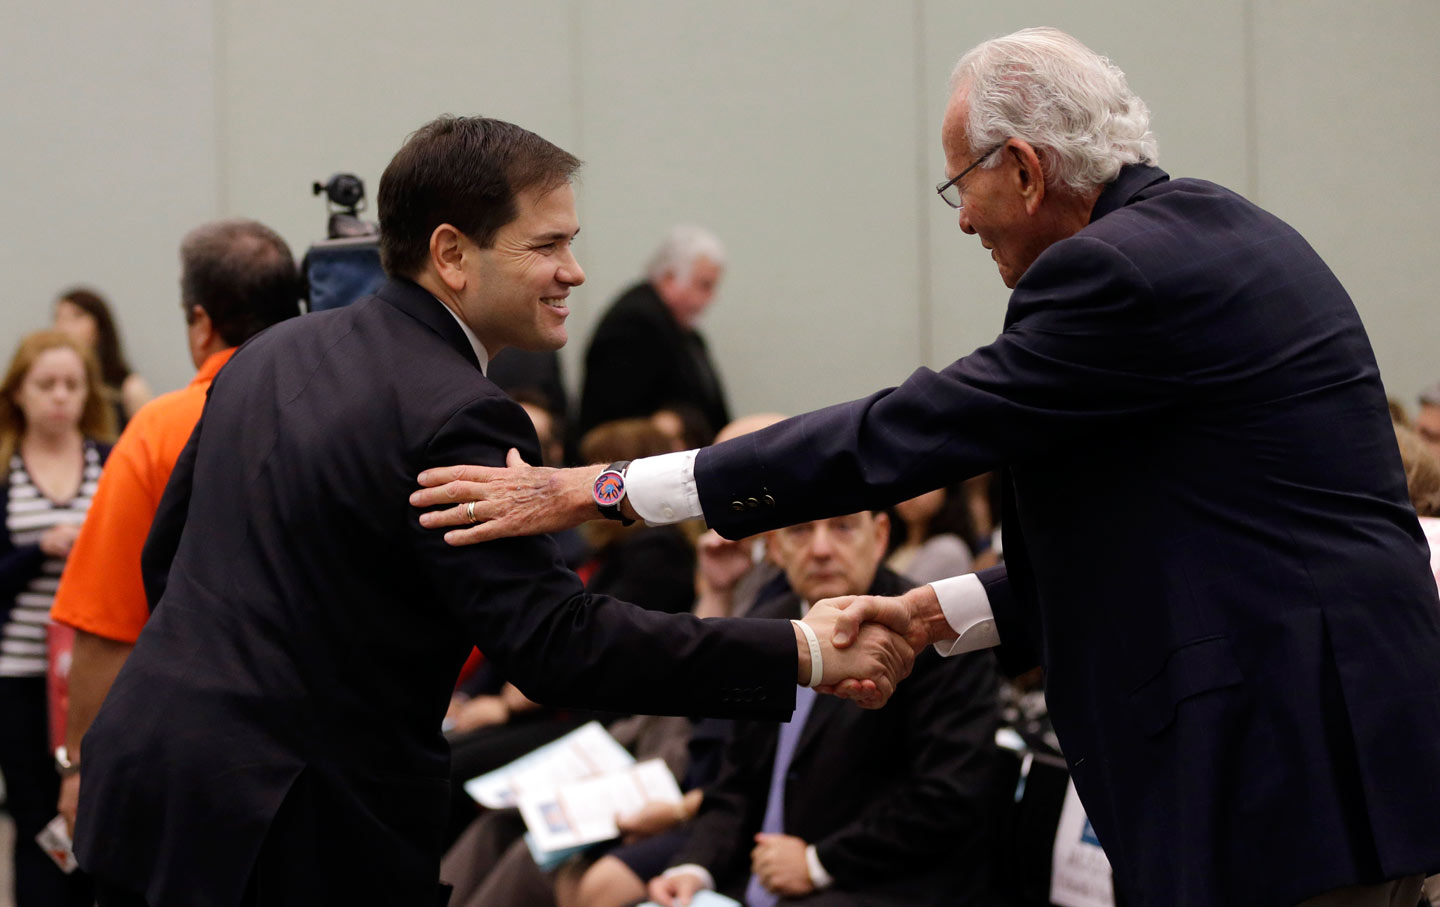 Marco Rubio shakes hands with major donor and former employer Norman Braman in Miami.